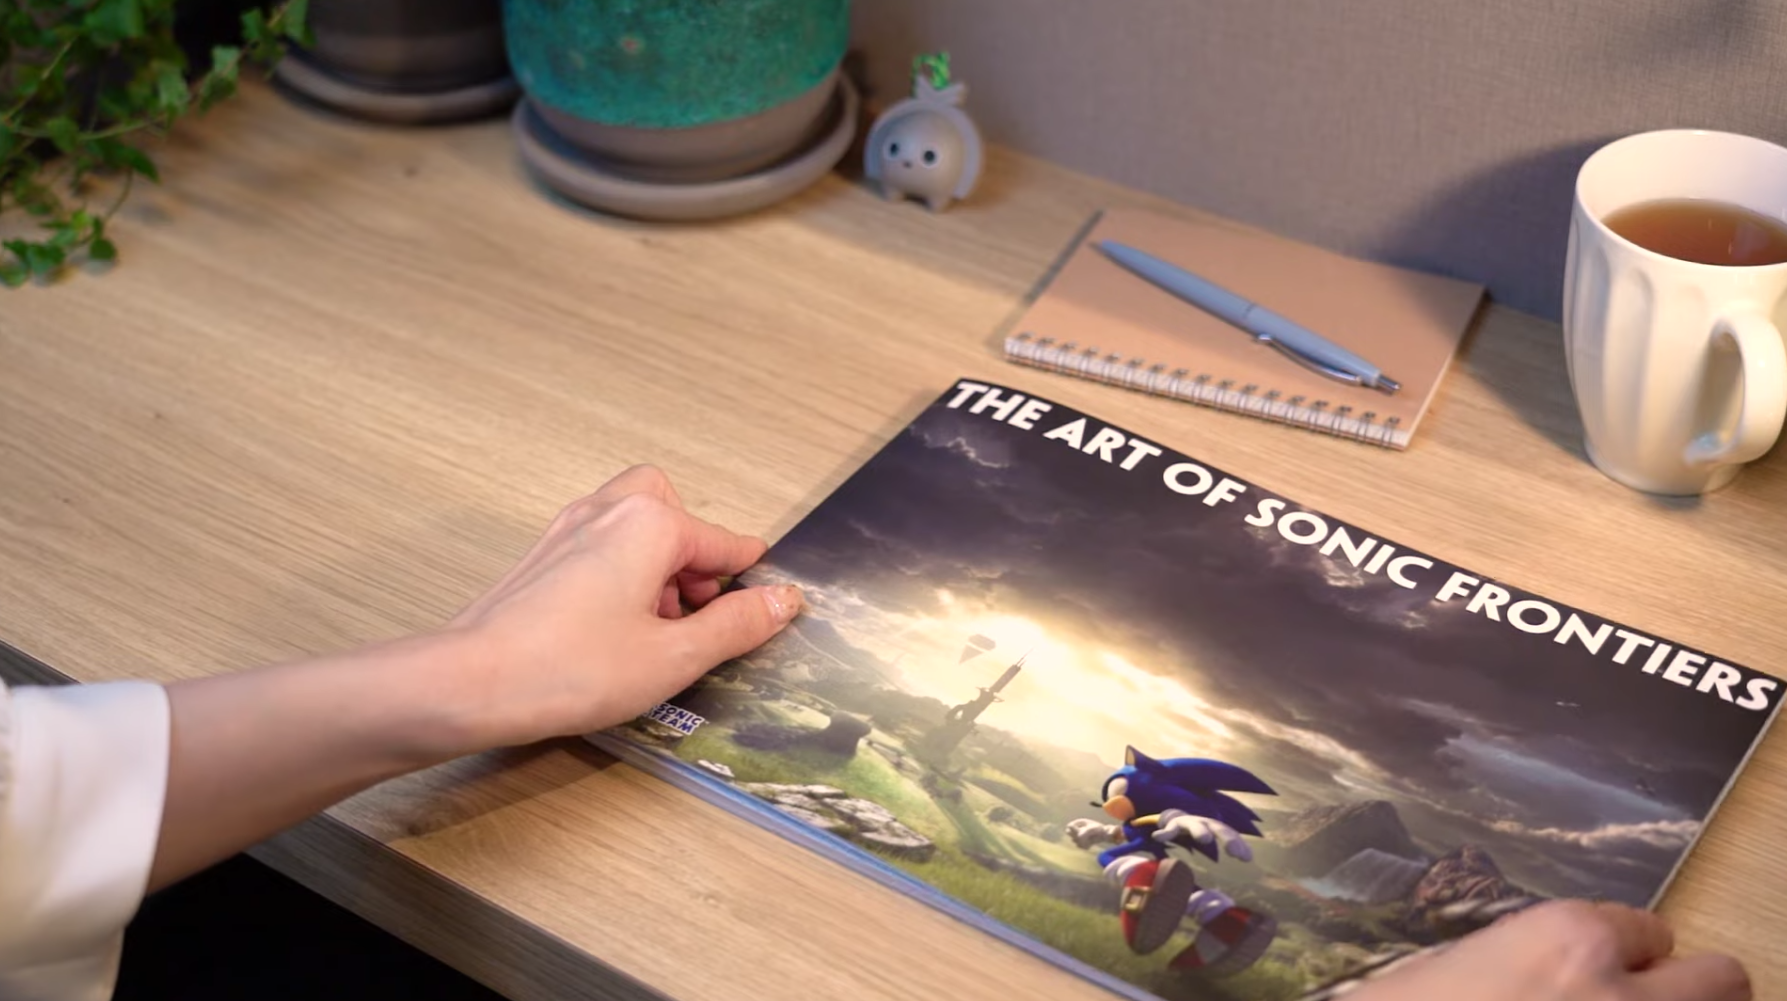 CDJapan : Sonic Frontiers [w/ Artbook & Charm, Limited Edition